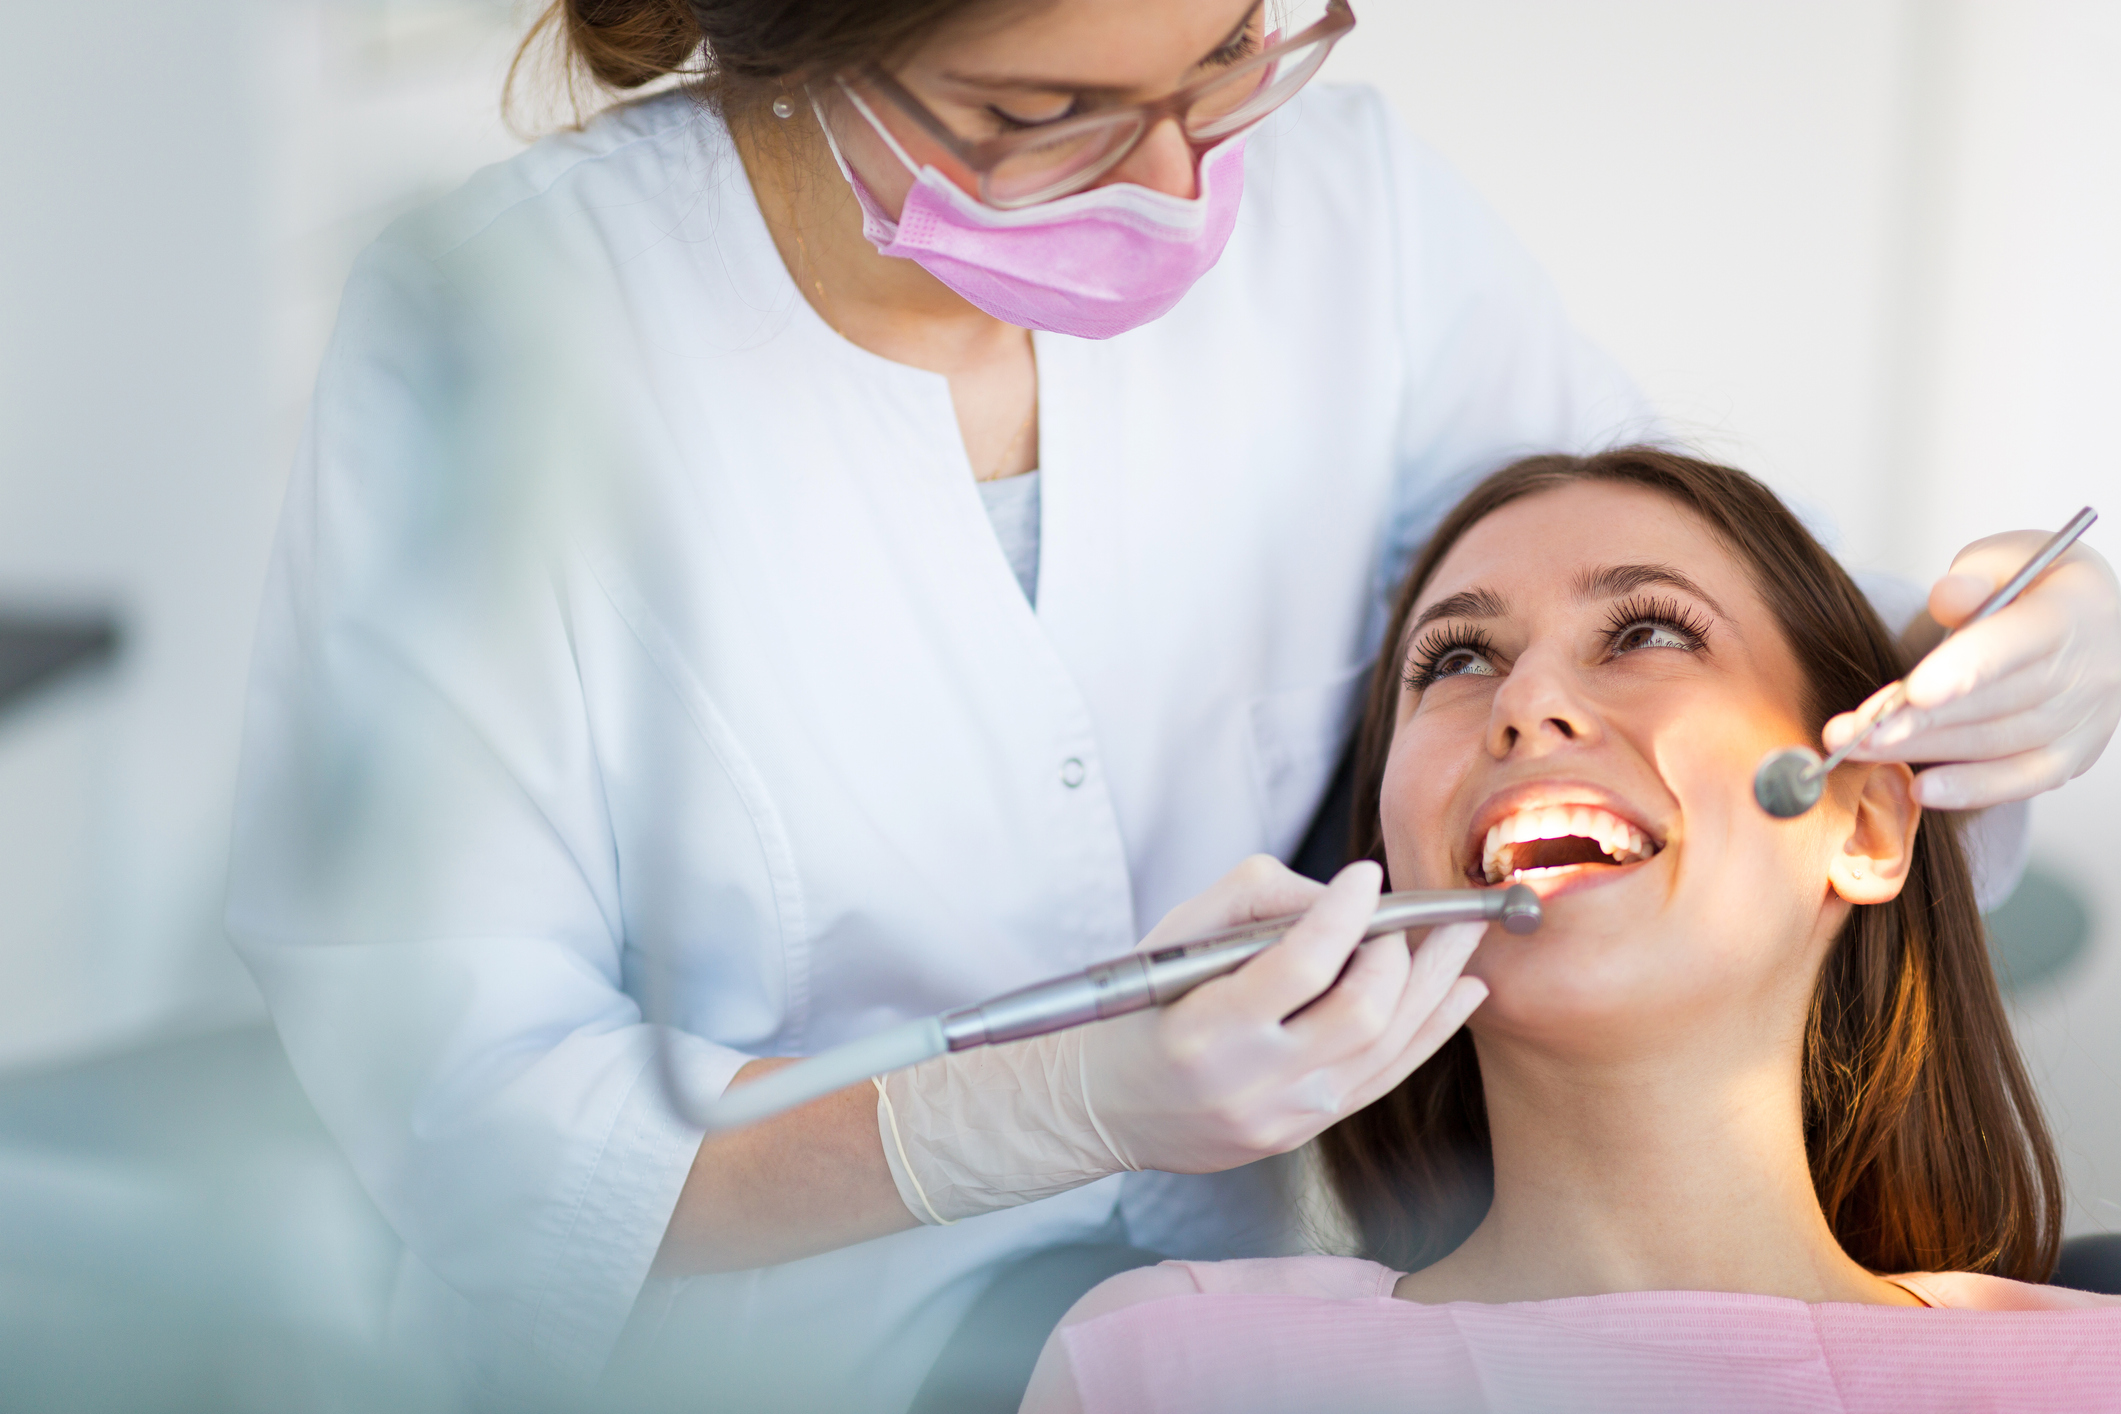 Smile Brighter With Top-Notch Dental Clinic Services in Richardson